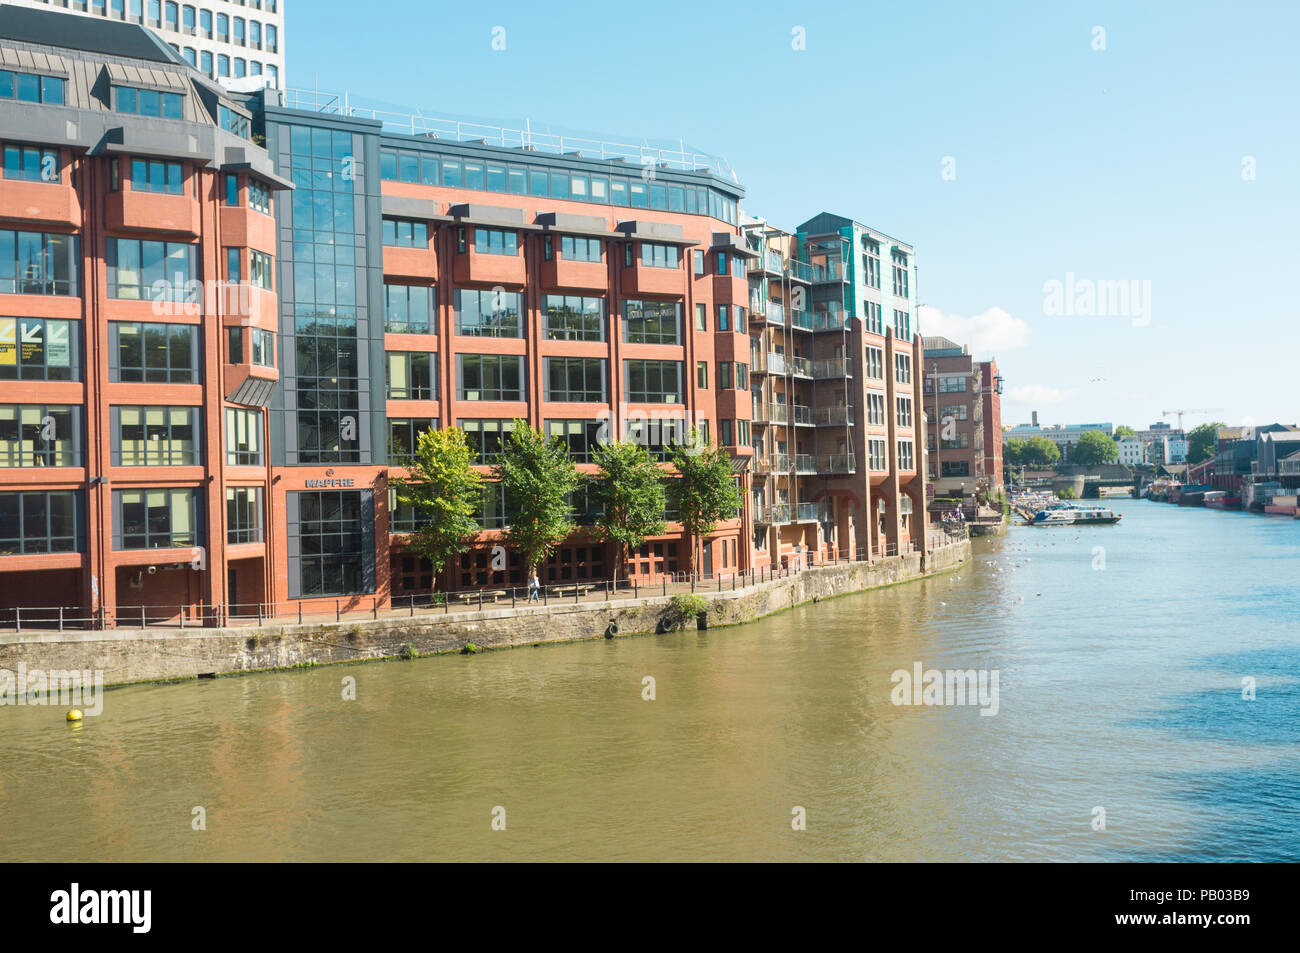 Residential properties on the river side, Bristol, UK Stock Photo